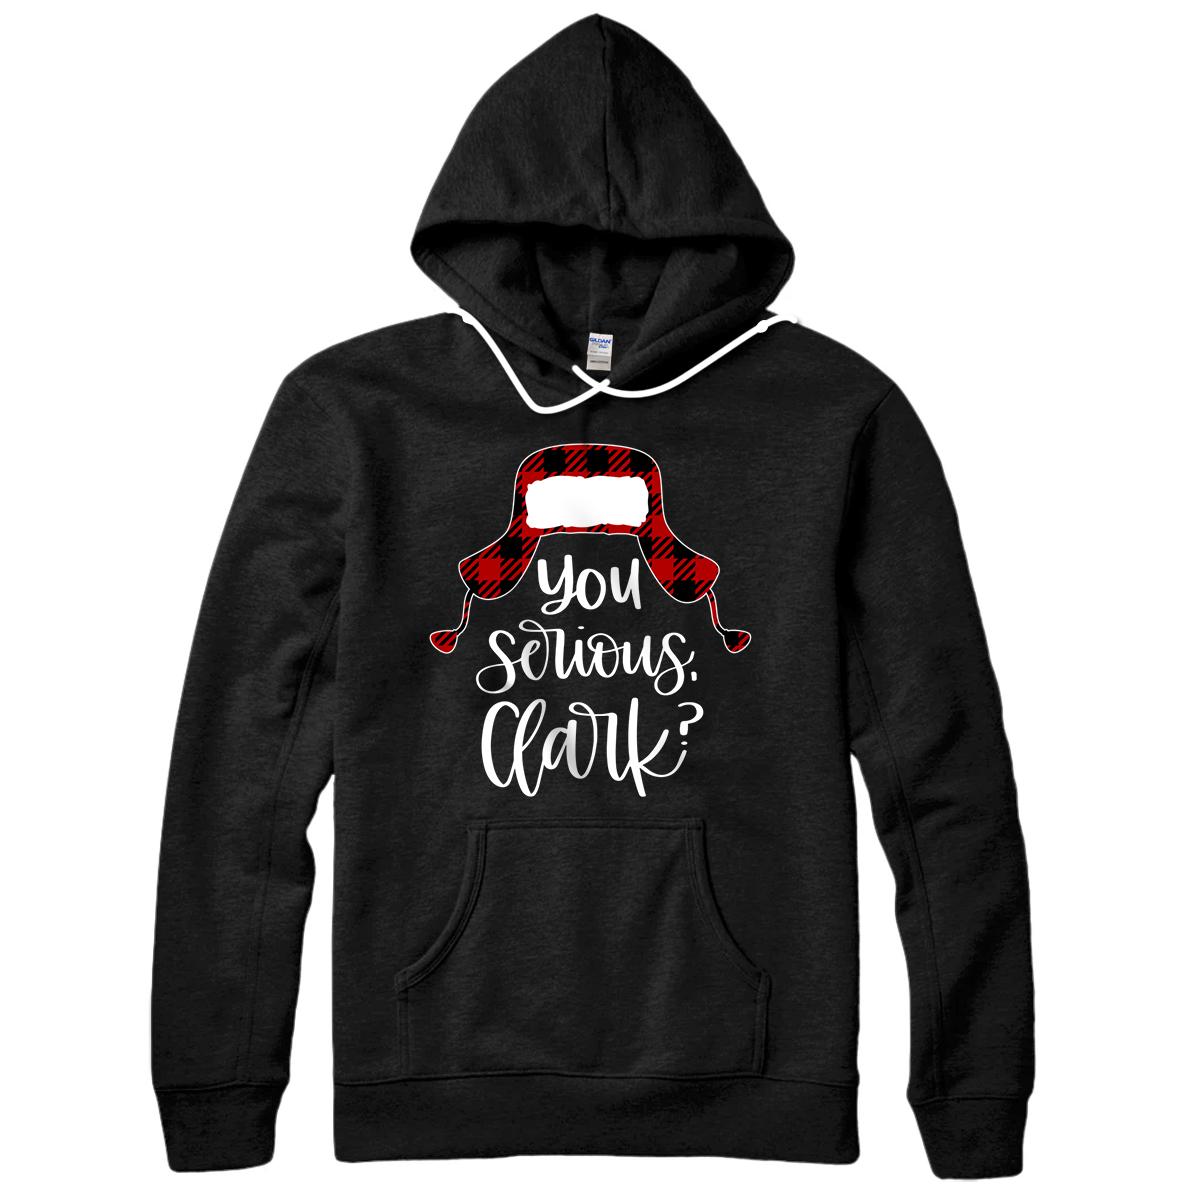 Personalized You Serious Clark? Shirt Ugly Sweater Funny Christmas Pullover Hoodie